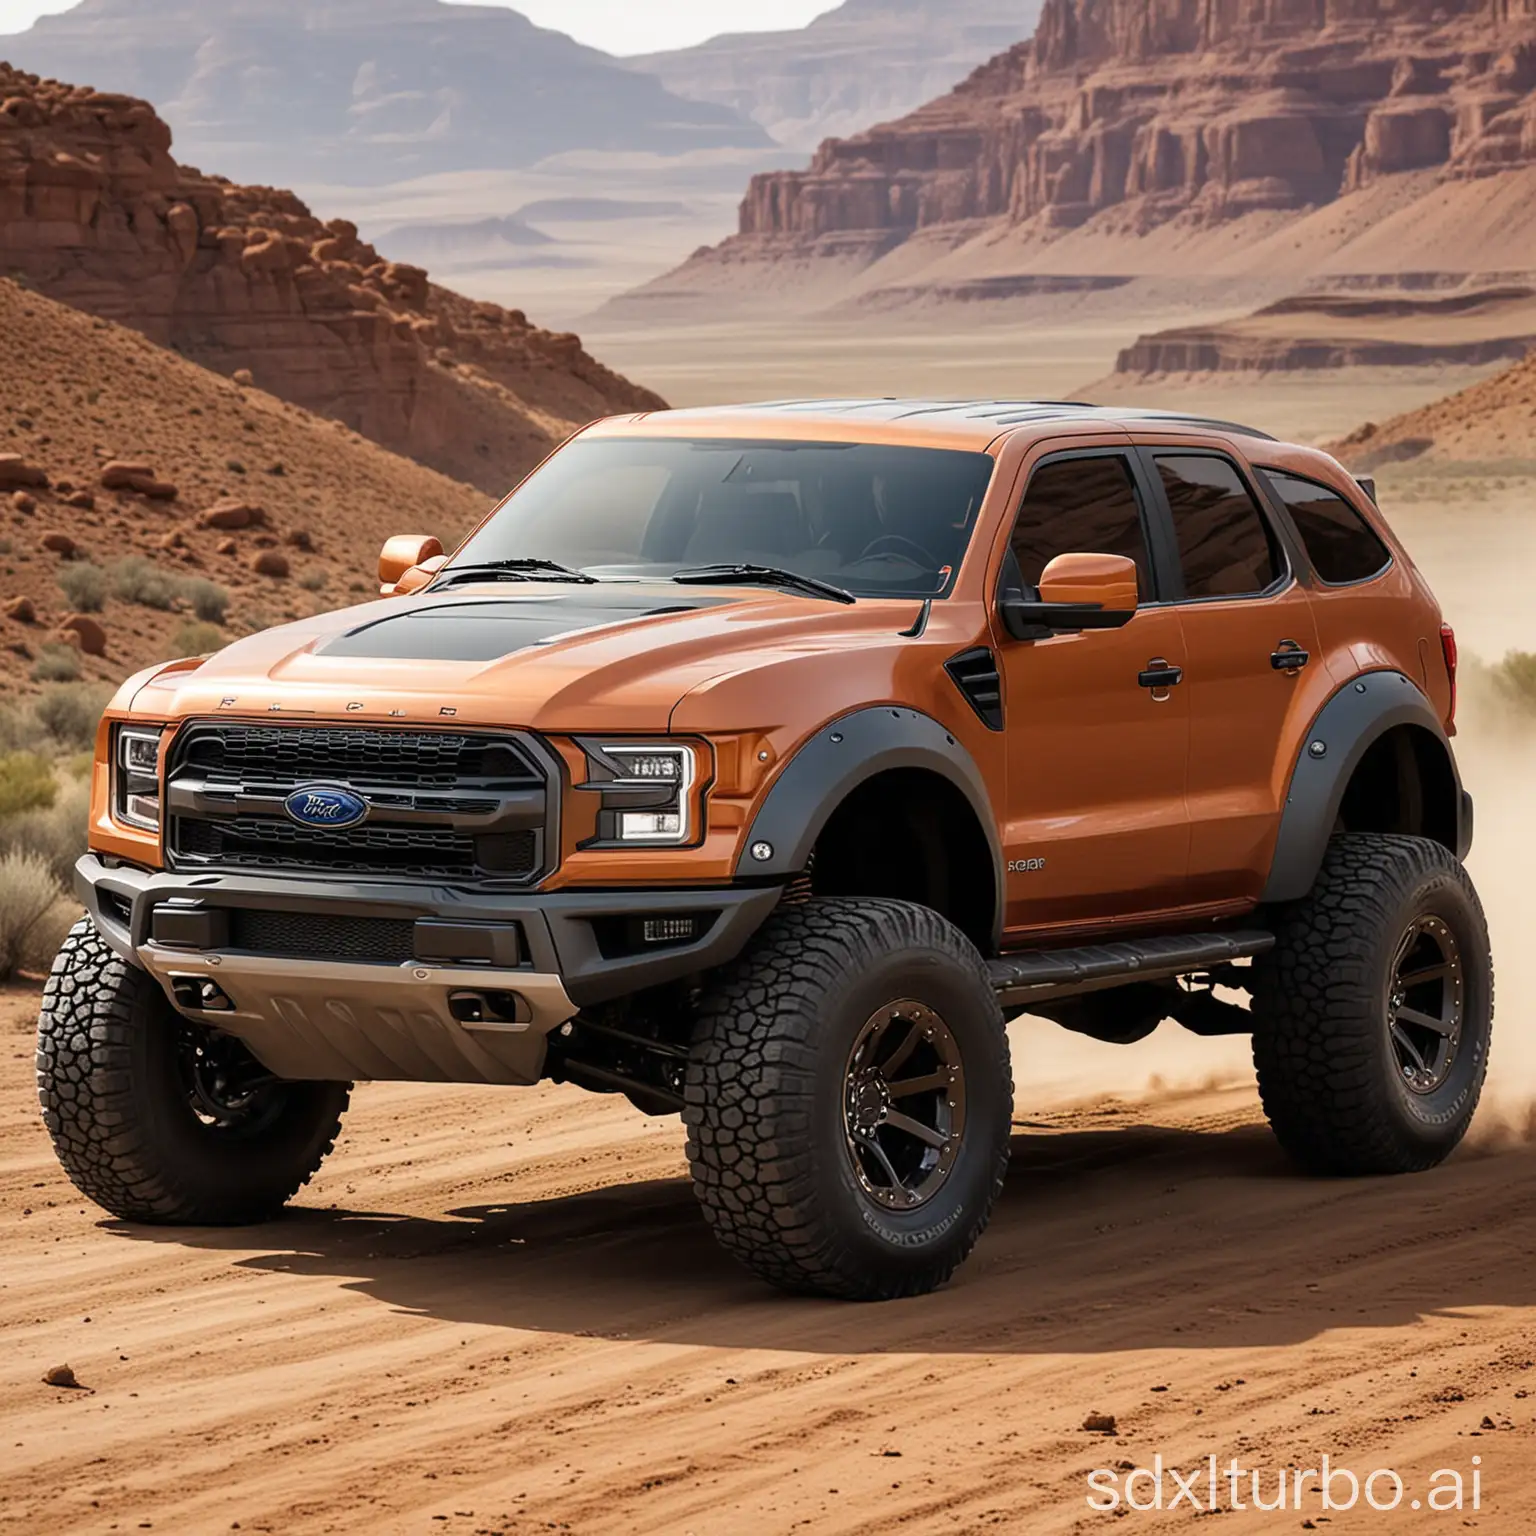 I want a car with the Ford brand. Its upper body is a sports car, and its lower body is a rugged off-road vehicle. Please give me a realistic style picture.